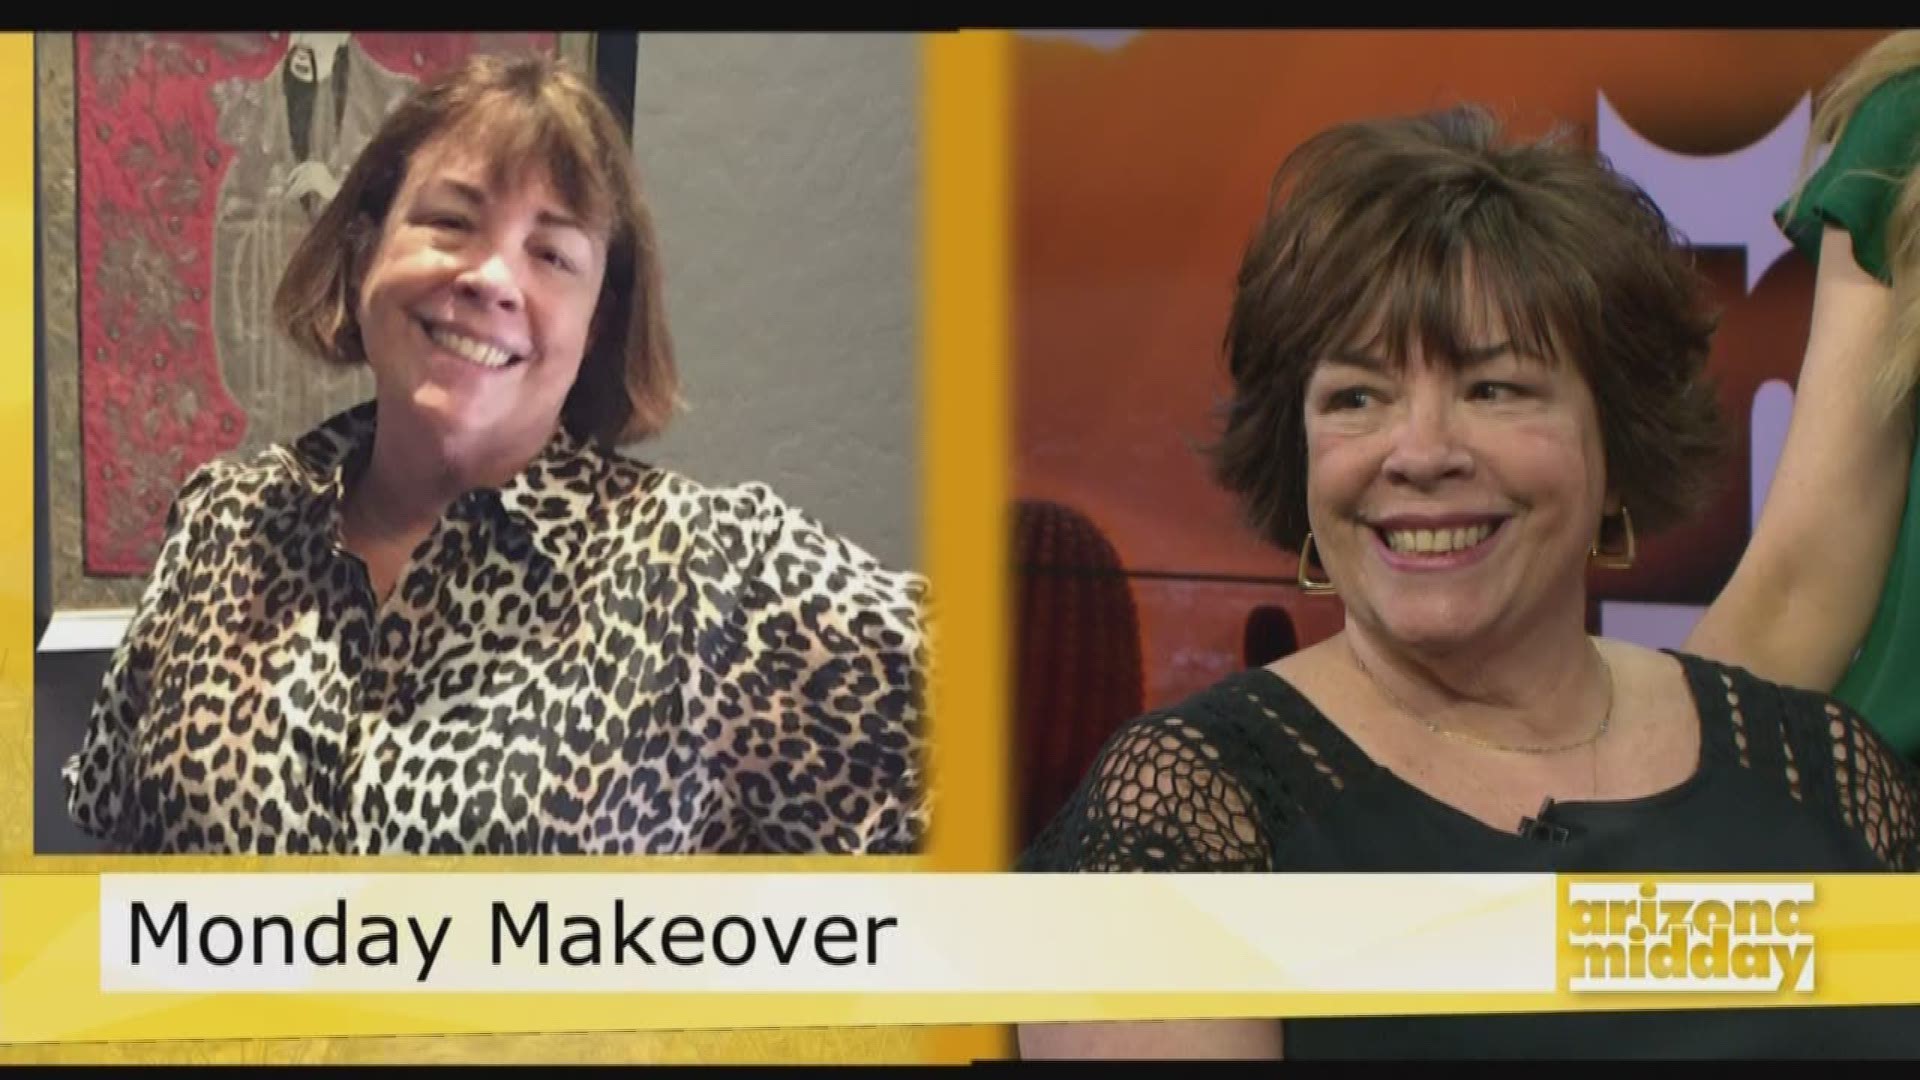 Veronica from BBV Salon shows us our Monday Makeover and how Farrah Fawcett hair is making a comeback!